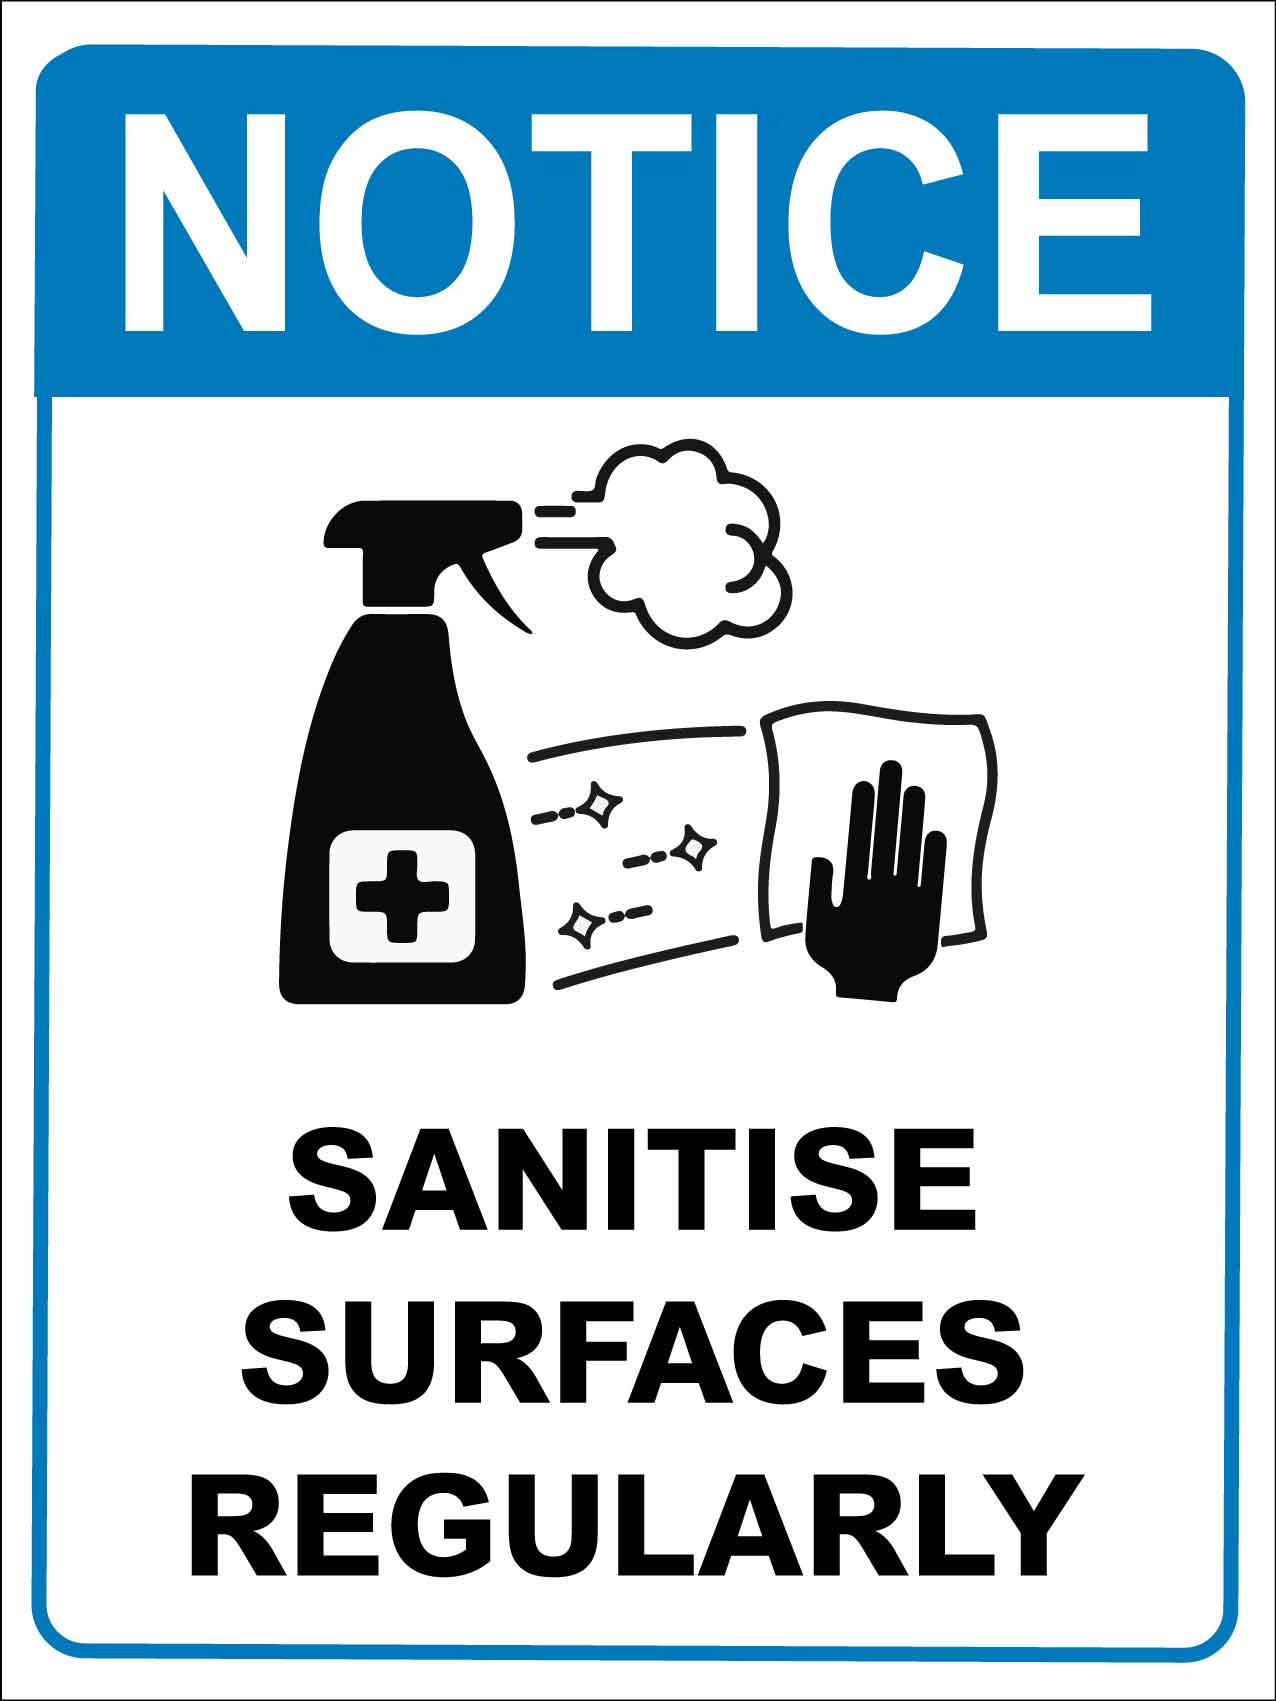 Notice Sanitise Surfaces Regularly Blue Sign